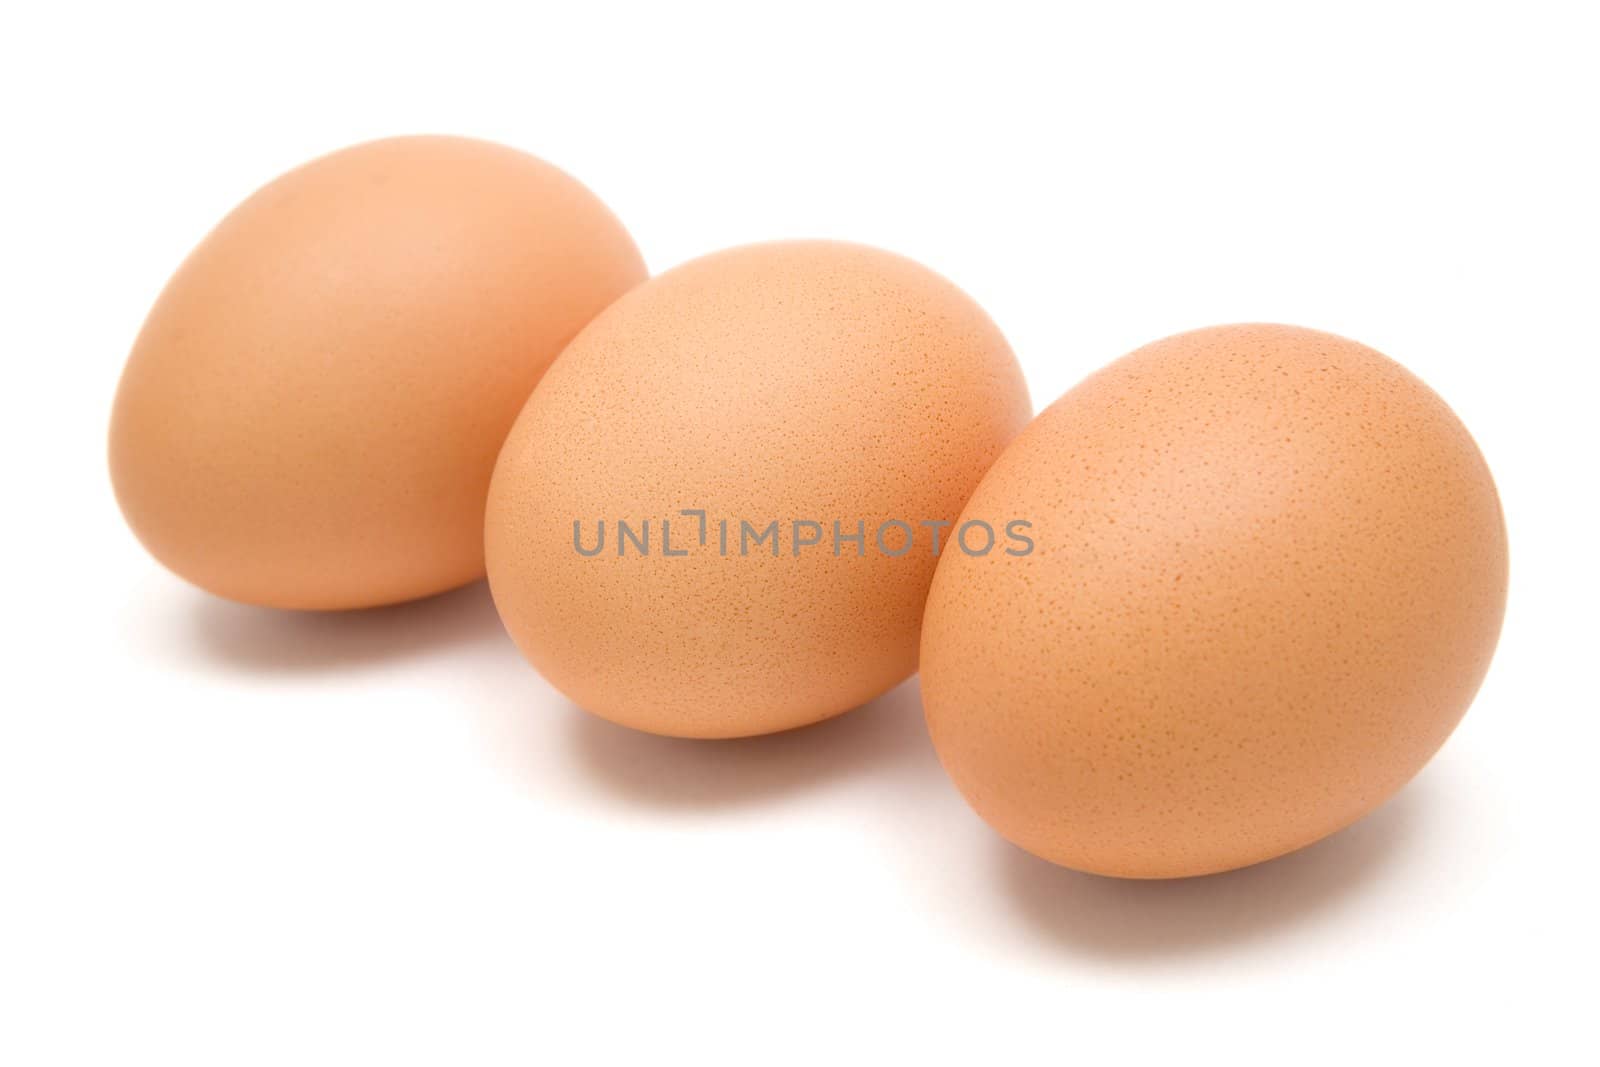 Three animal eggs in a row. White background.